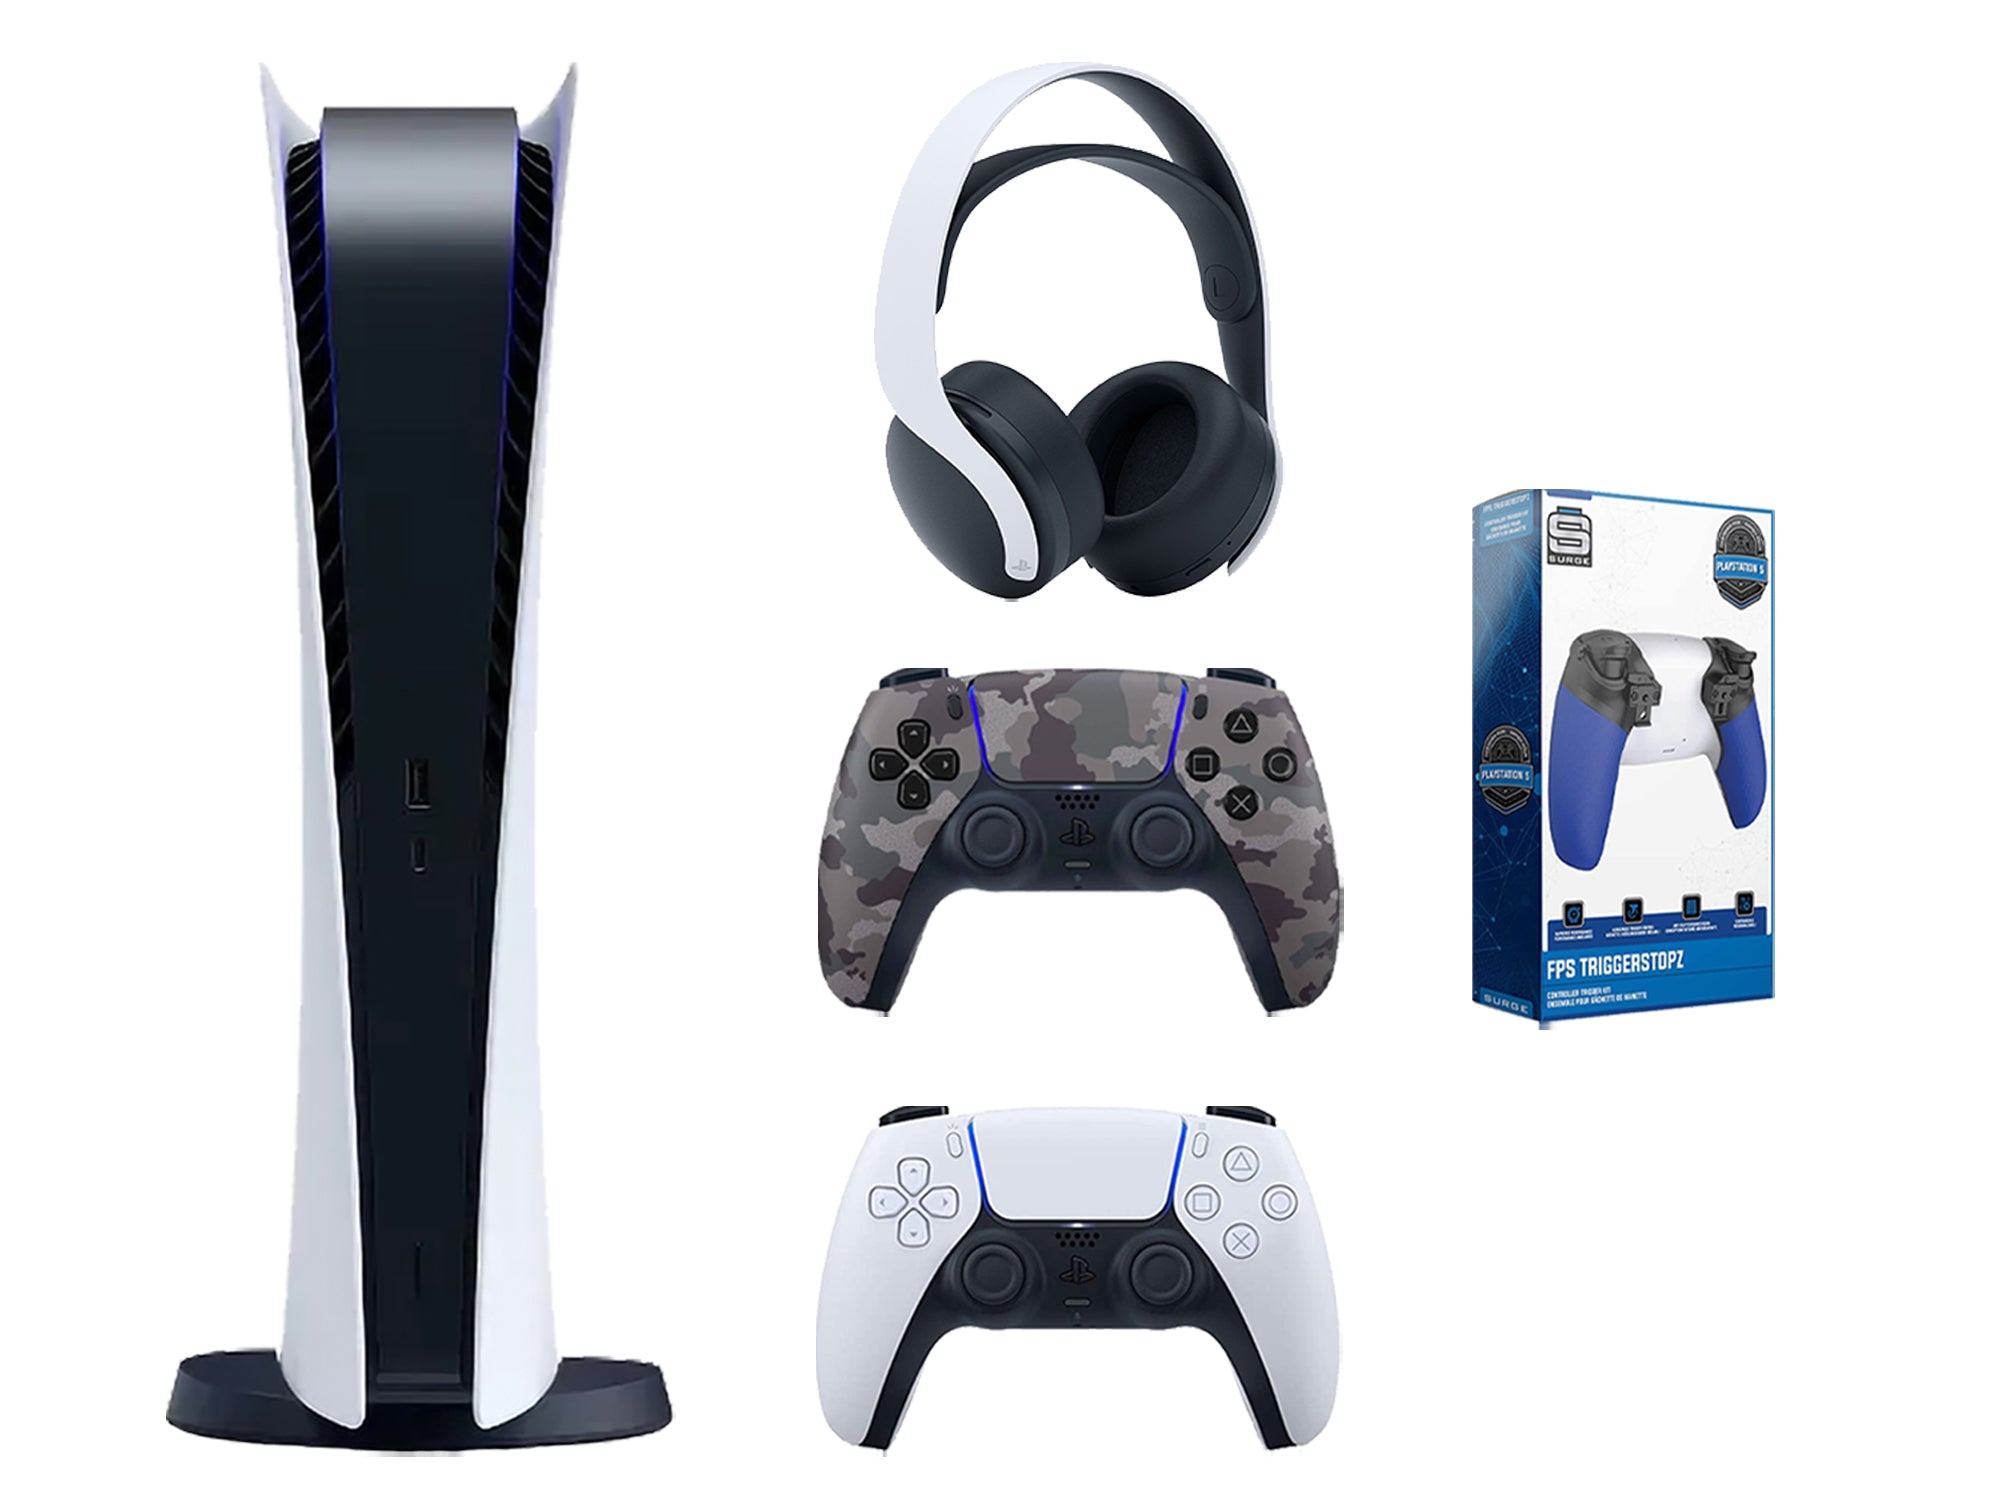 Sony Playstation 5 Digital Edition Bundle with Extra Gray Camo Controller, White PULSE 3D Wireless Headset and Trigger Kit - Pro-Distributing